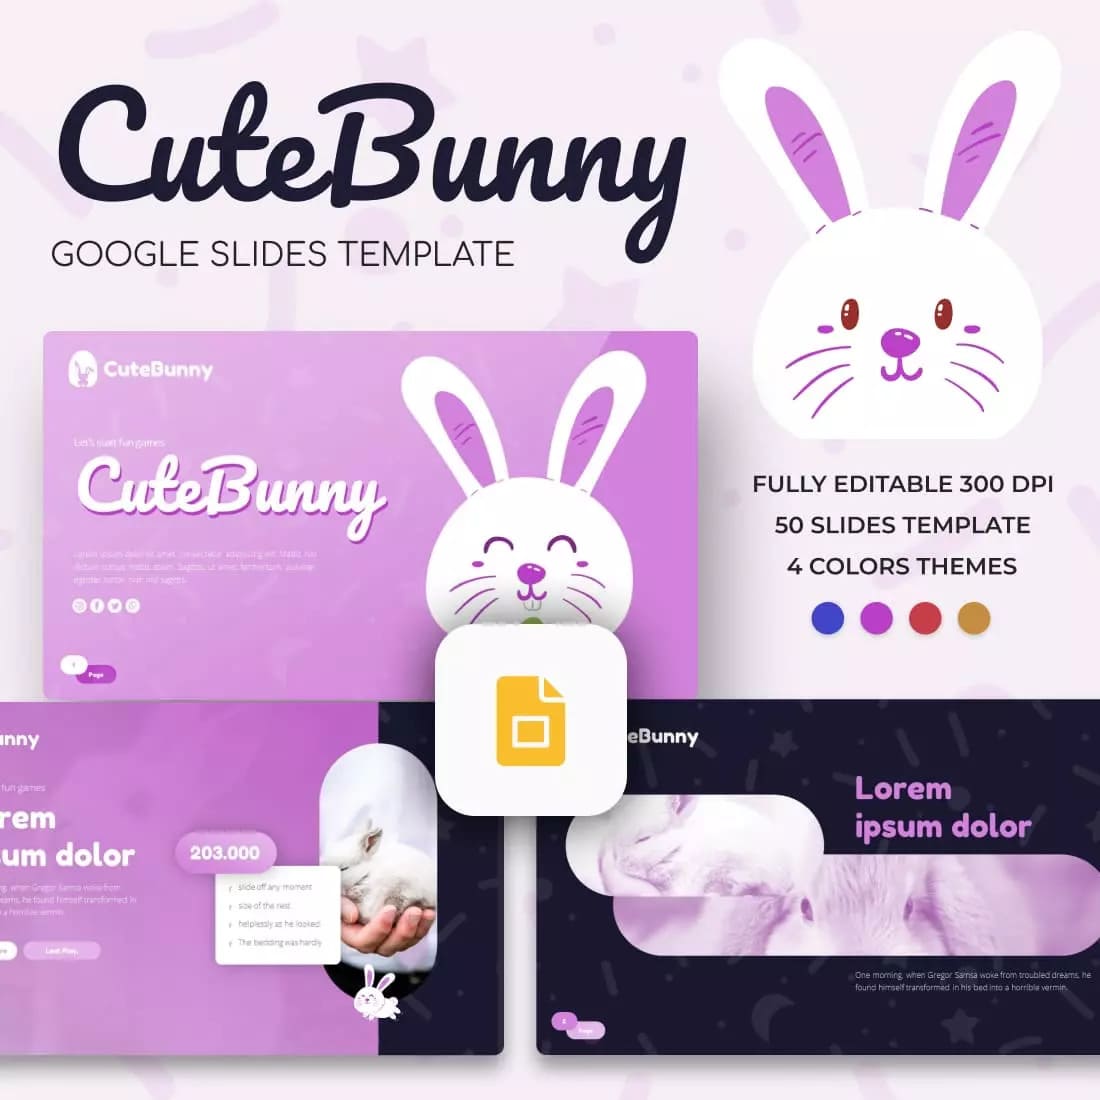 Cute Bunny Google Slides Template Preview 7.